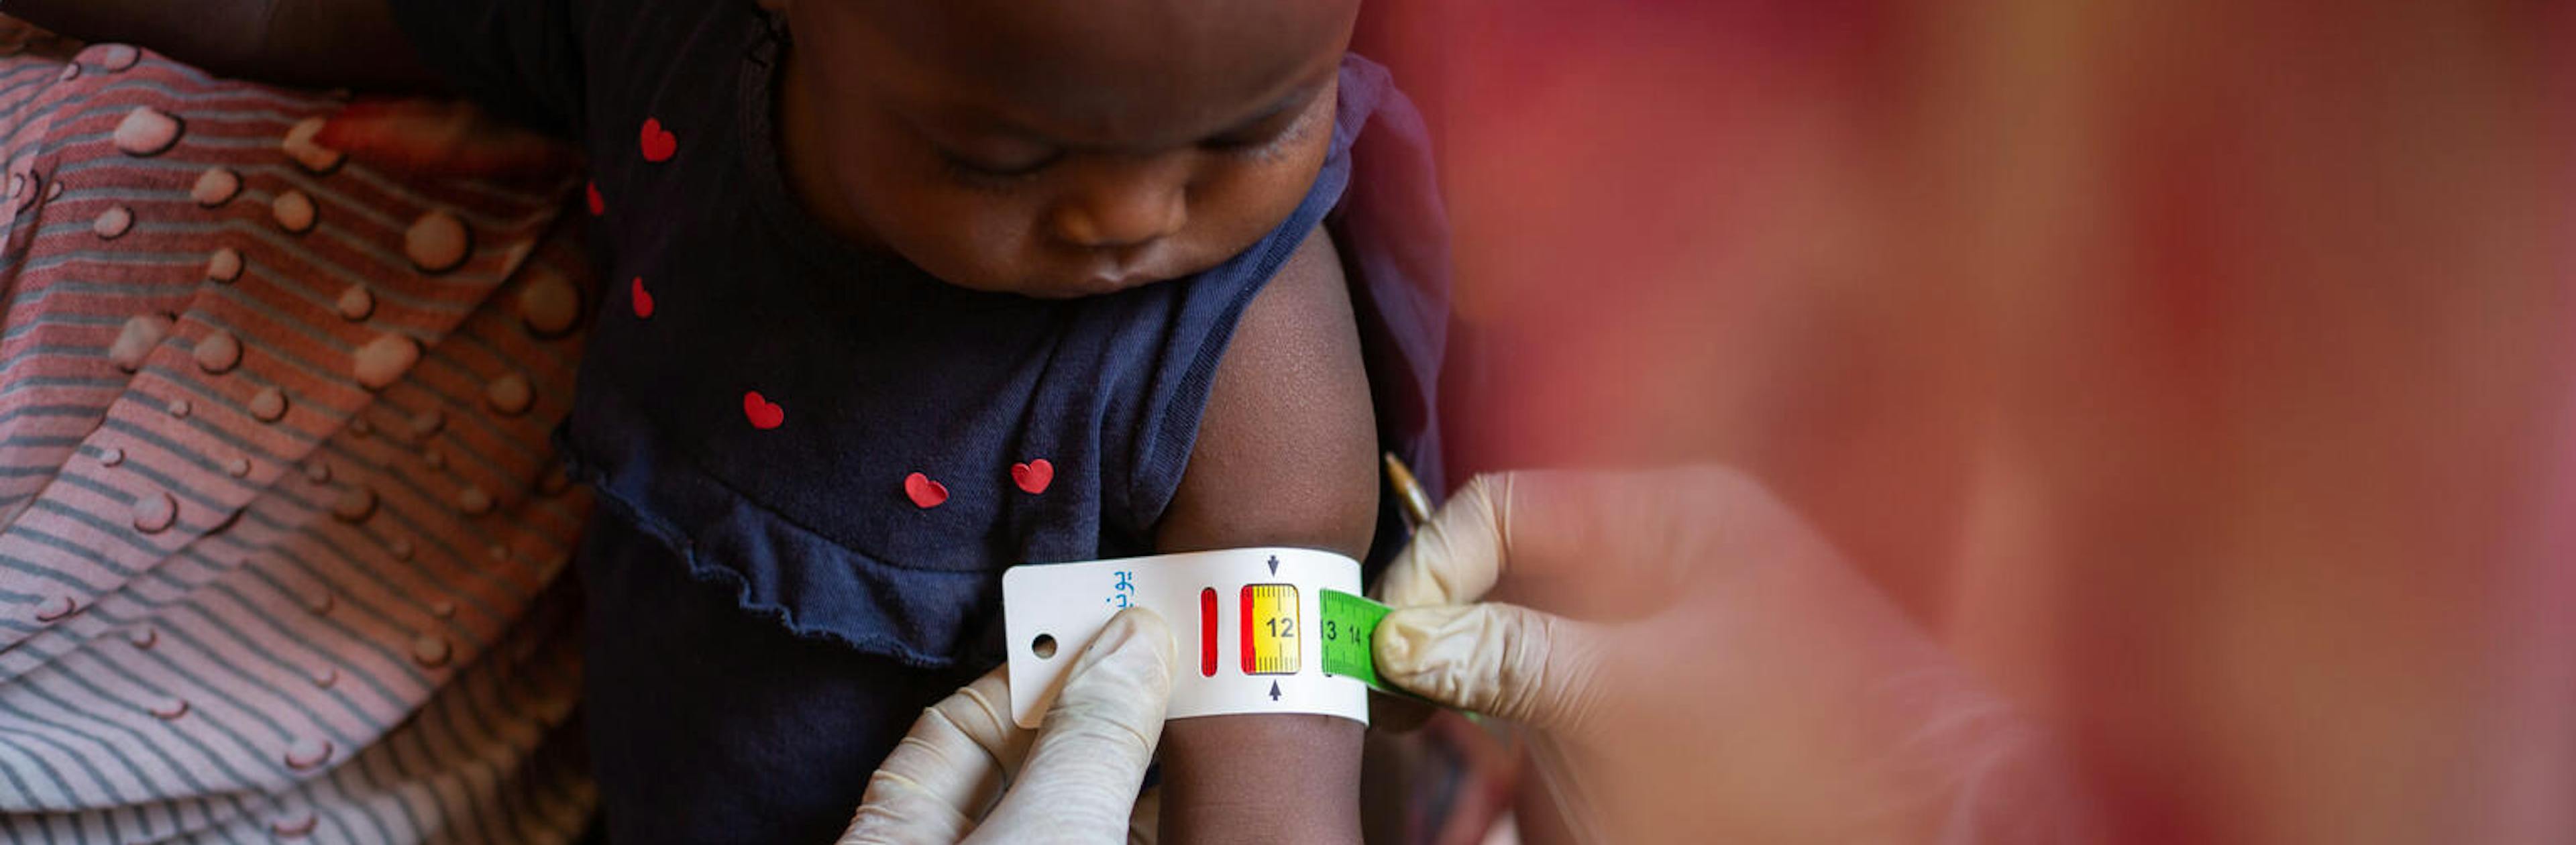 Catching signs of malnutrition early - a child is screened for malnutrition using a MUAC band